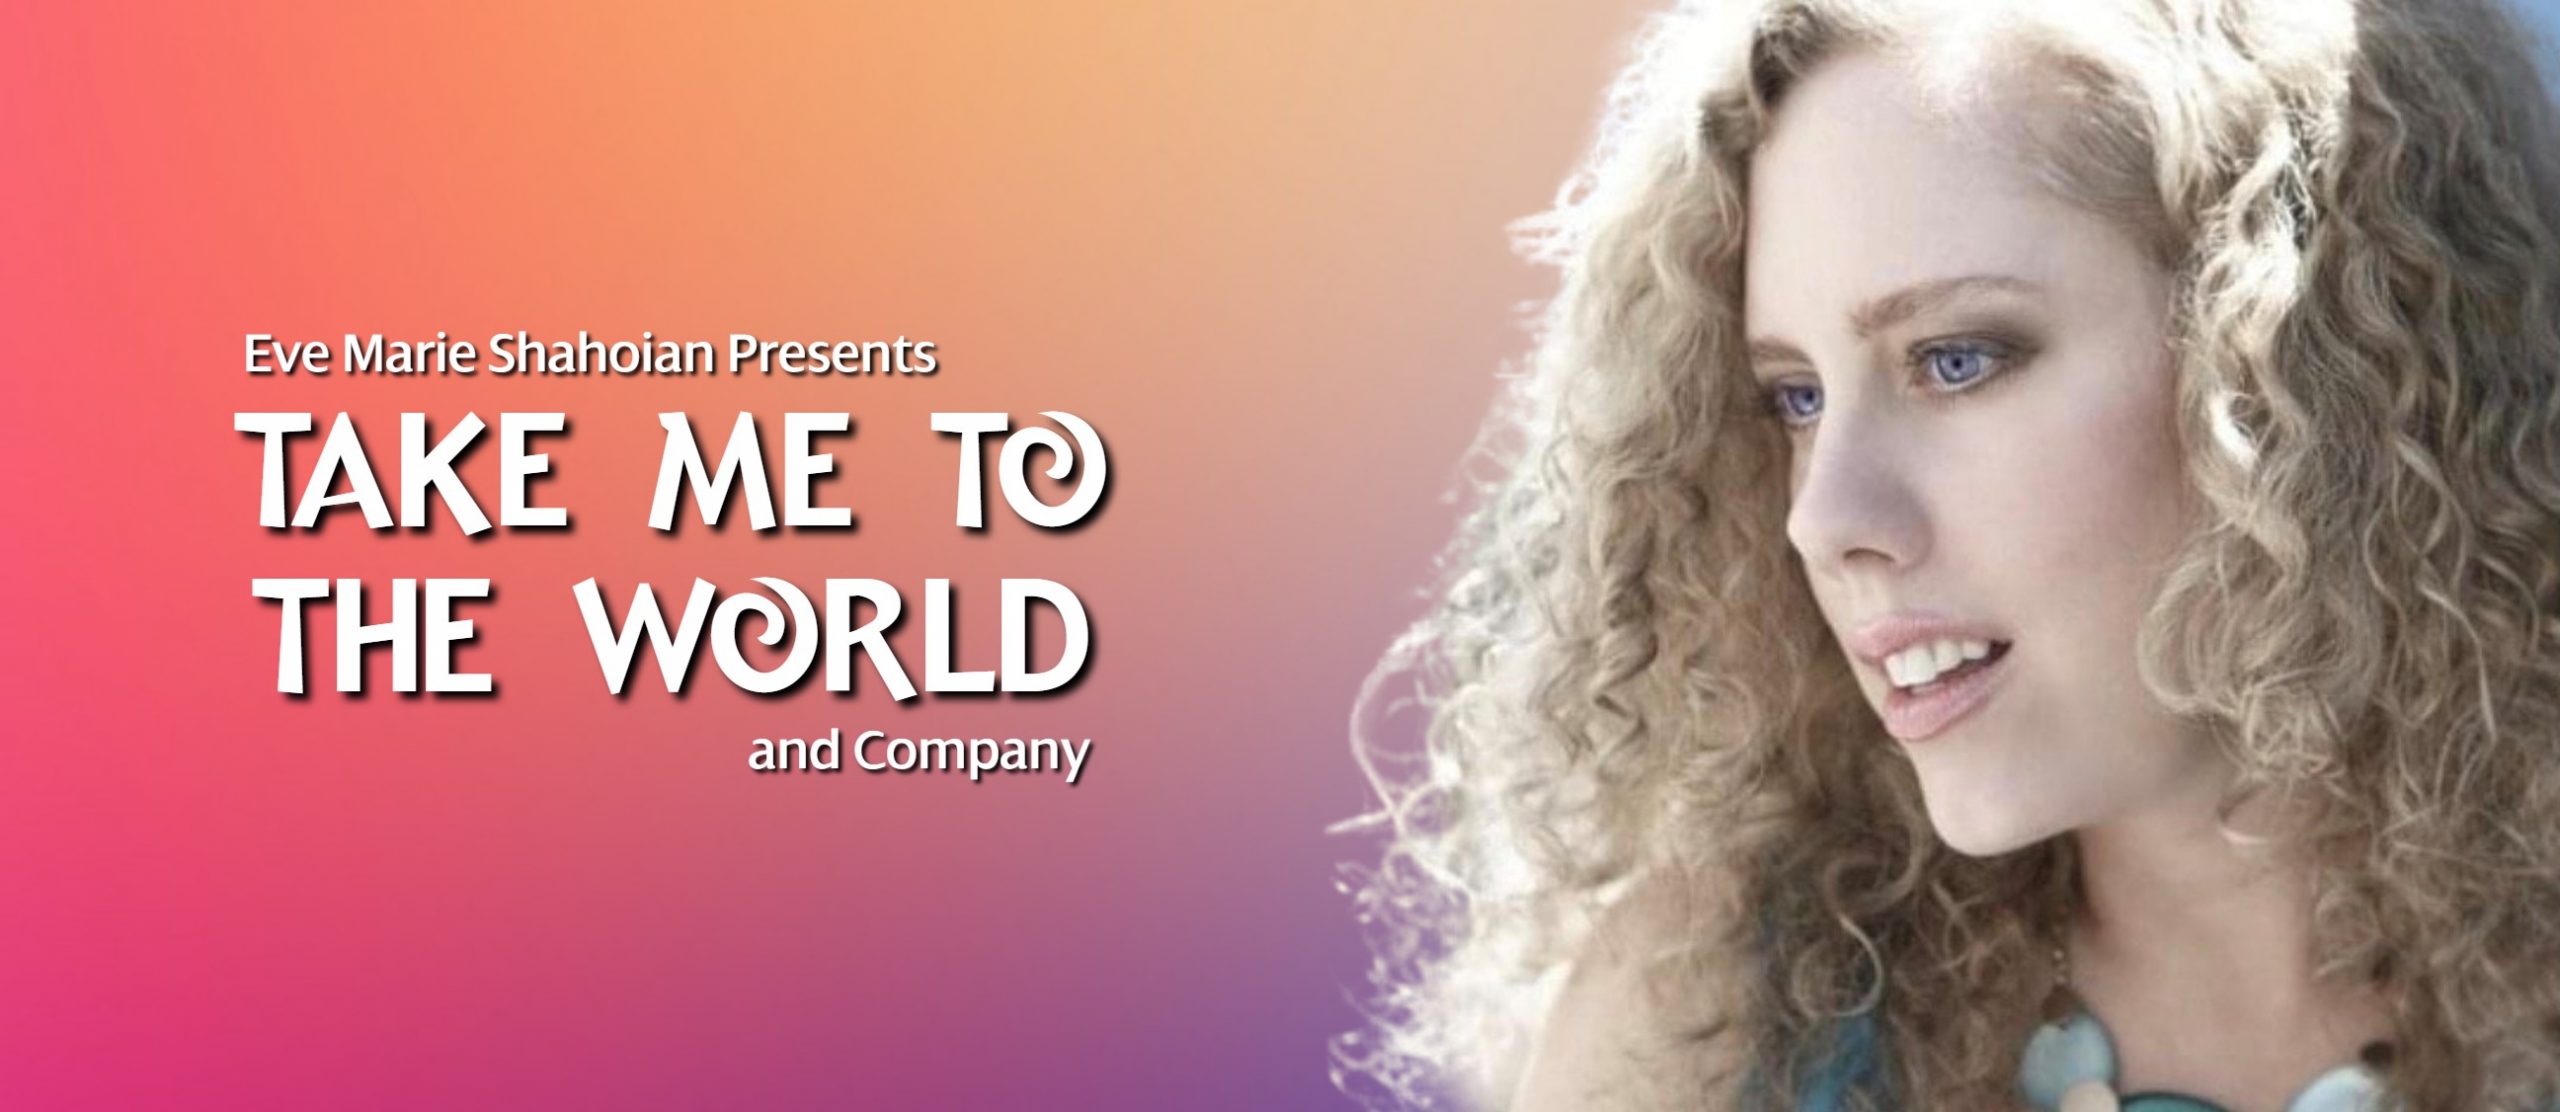 Eve Marie Shahoian Presents Take Me to the World and Company